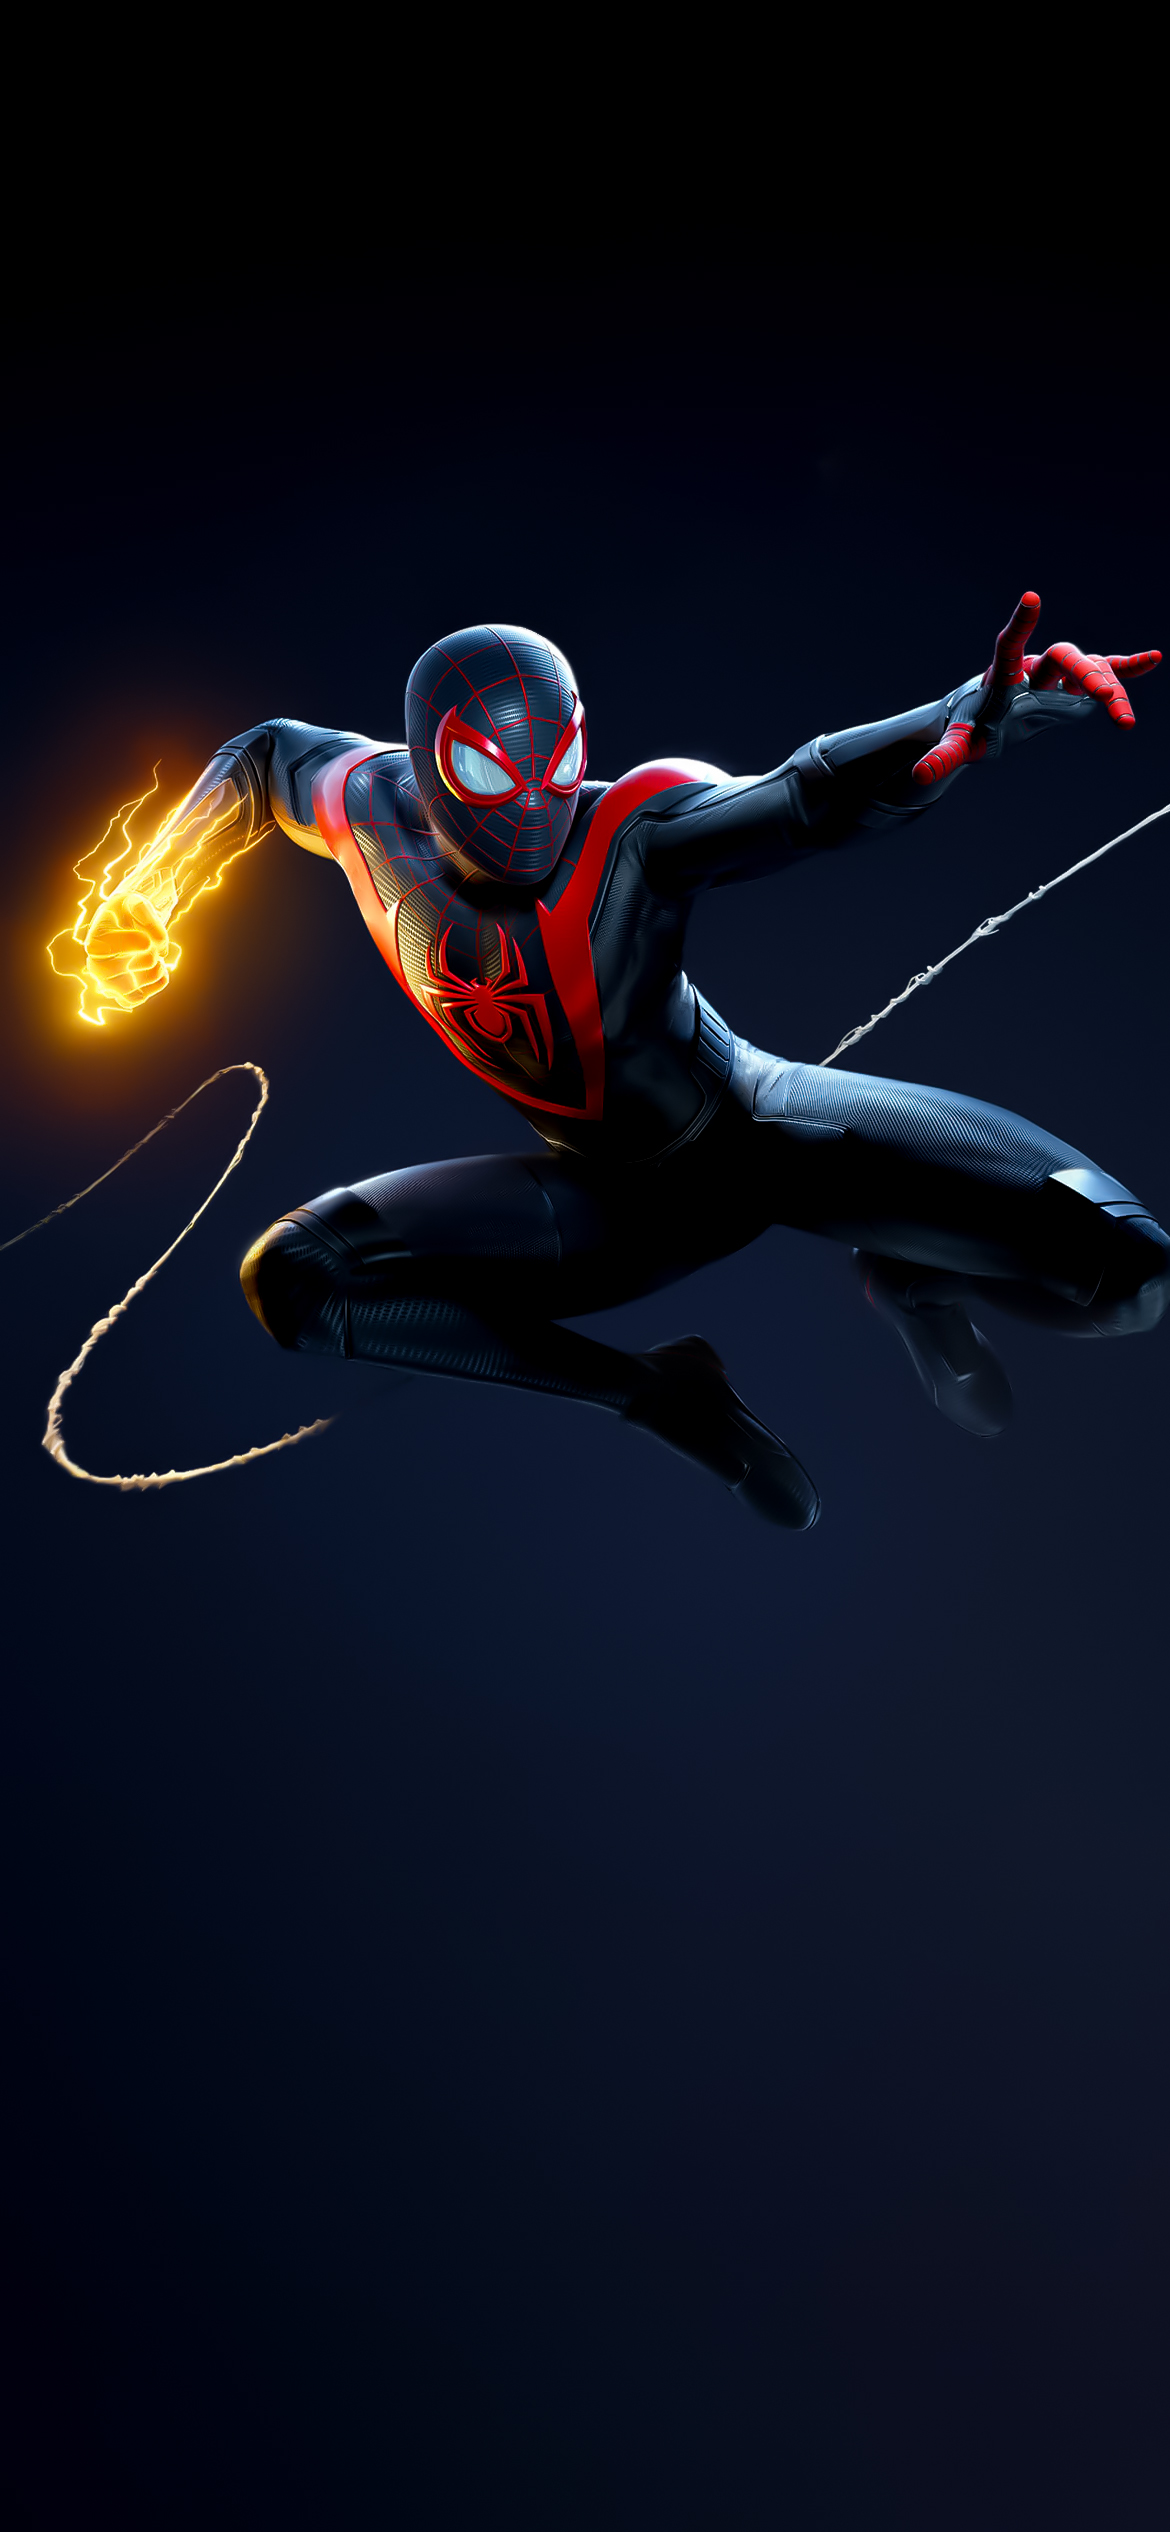 Spider-man wallpapers for iPhone and Android | HeroWall - Cool Background  Wallpapers